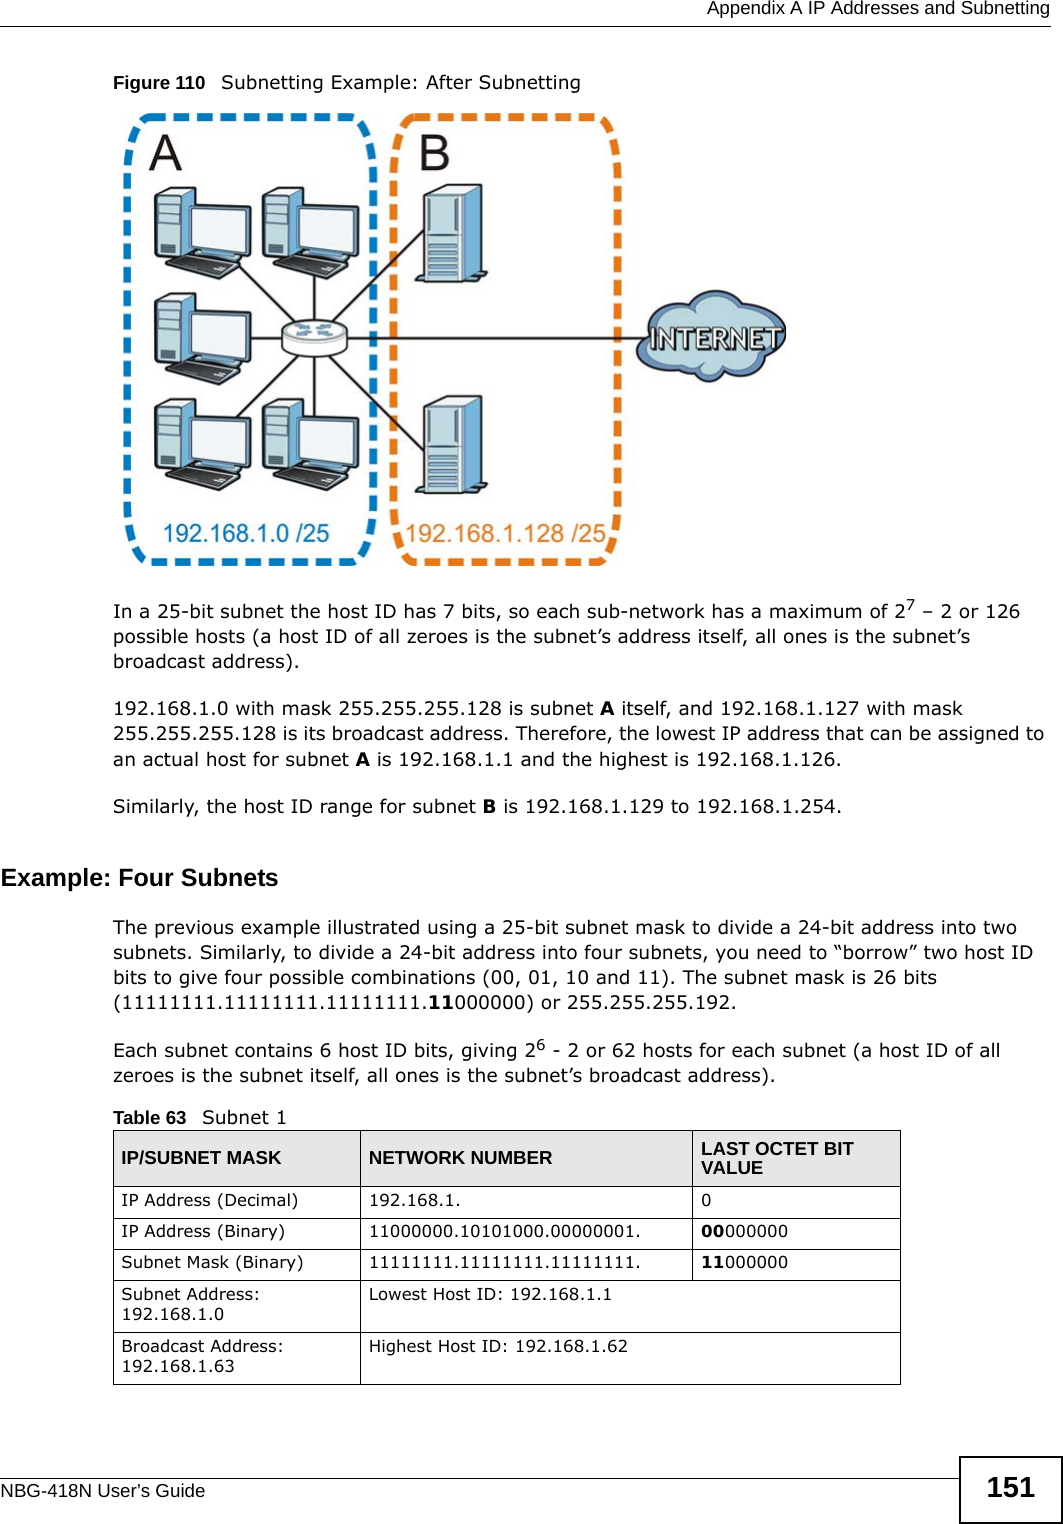  Appendix A IP Addresses and SubnettingNBG-418N User’s Guide 151Figure 110   Subnetting Example: After SubnettingIn a 25-bit subnet the host ID has 7 bits, so each sub-network has a maximum of 27 – 2 or 126 possible hosts (a host ID of all zeroes is the subnet’s address itself, all ones is the subnet’s broadcast address).192.168.1.0 with mask 255.255.255.128 is subnet A itself, and 192.168.1.127 with mask 255.255.255.128 is its broadcast address. Therefore, the lowest IP address that can be assigned to an actual host for subnet A is 192.168.1.1 and the highest is 192.168.1.126. Similarly, the host ID range for subnet B is 192.168.1.129 to 192.168.1.254.Example: Four Subnets The previous example illustrated using a 25-bit subnet mask to divide a 24-bit address into two subnets. Similarly, to divide a 24-bit address into four subnets, you need to “borrow” two host ID bits to give four possible combinations (00, 01, 10 and 11). The subnet mask is 26 bits (11111111.11111111.11111111.11000000) or 255.255.255.192. Each subnet contains 6 host ID bits, giving 26 - 2 or 62 hosts for each subnet (a host ID of all zeroes is the subnet itself, all ones is the subnet’s broadcast address). Table 63   Subnet 1IP/SUBNET MASK NETWORK NUMBER LAST OCTET BIT VALUEIP Address (Decimal) 192.168.1. 0IP Address (Binary) 11000000.10101000.00000001. 00000000Subnet Mask (Binary) 11111111.11111111.11111111. 11000000Subnet Address: 192.168.1.0Lowest Host ID: 192.168.1.1Broadcast Address: 192.168.1.63Highest Host ID: 192.168.1.62